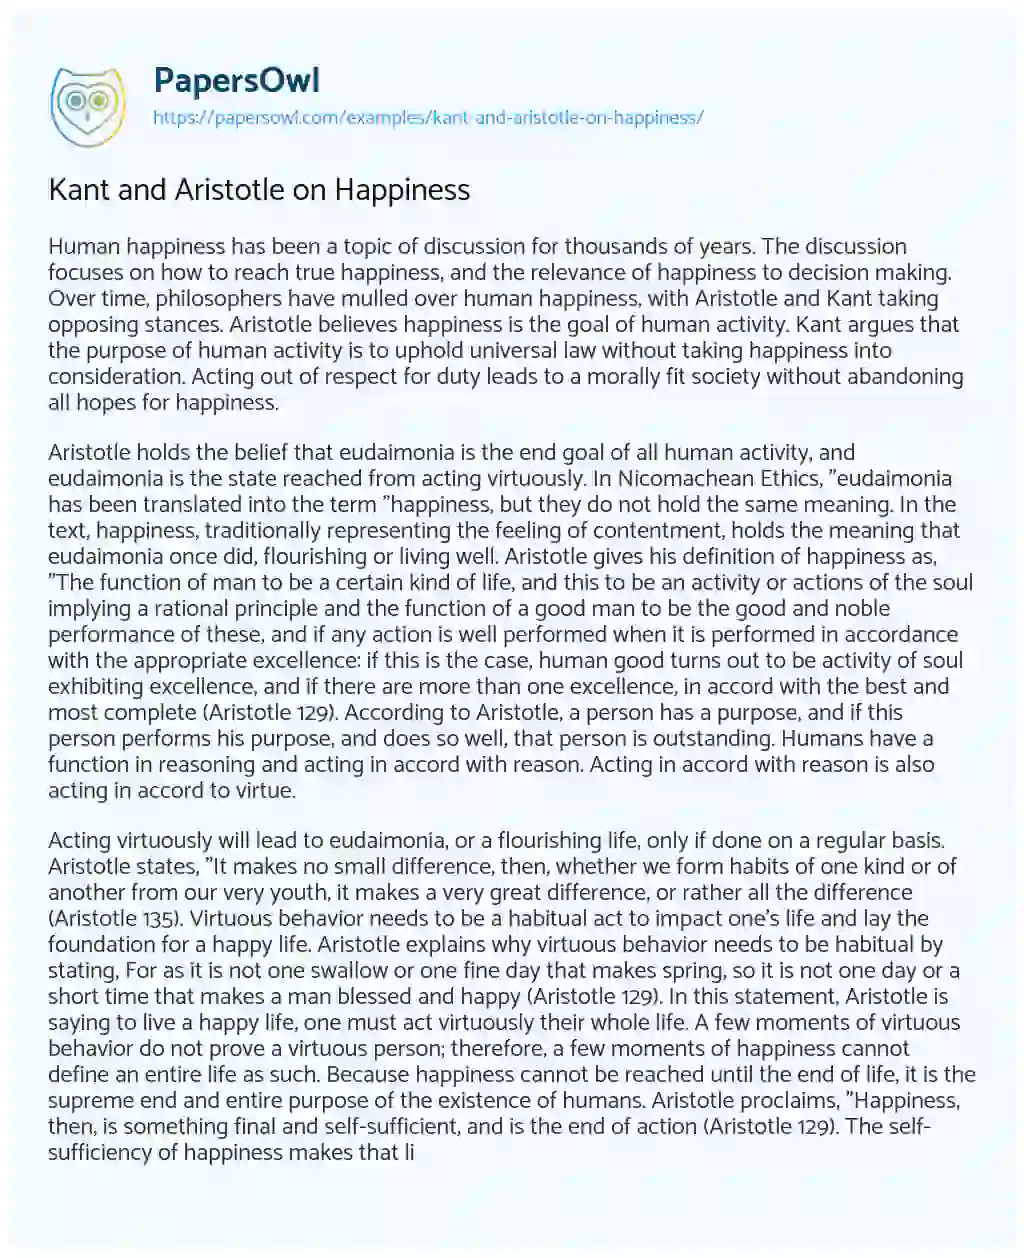 Kant and Aristotle on Happiness essay